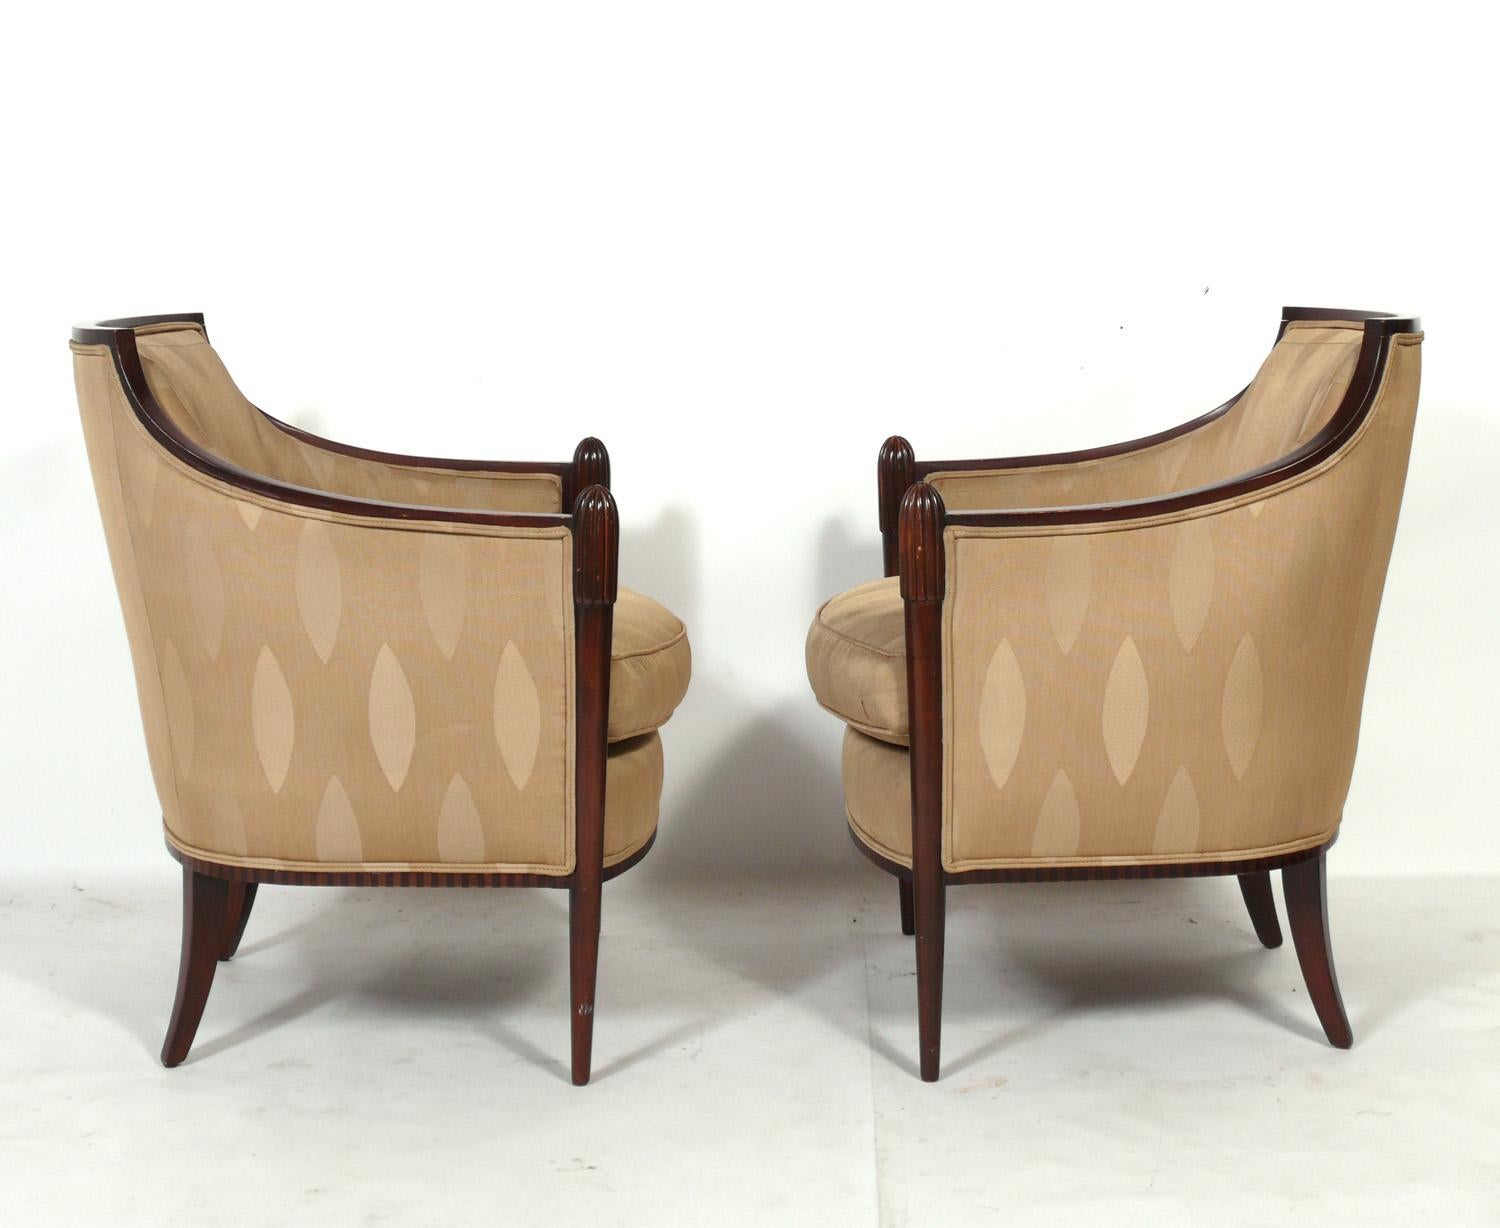 Pair of Elegant Art Deco Style Lounge Chairs, designed by Barbara Barry for Baker, American, circa 1990s. These chairs are currently being refinished and reupholstered and can be completed in your choice of wood finish color and reupholstered in